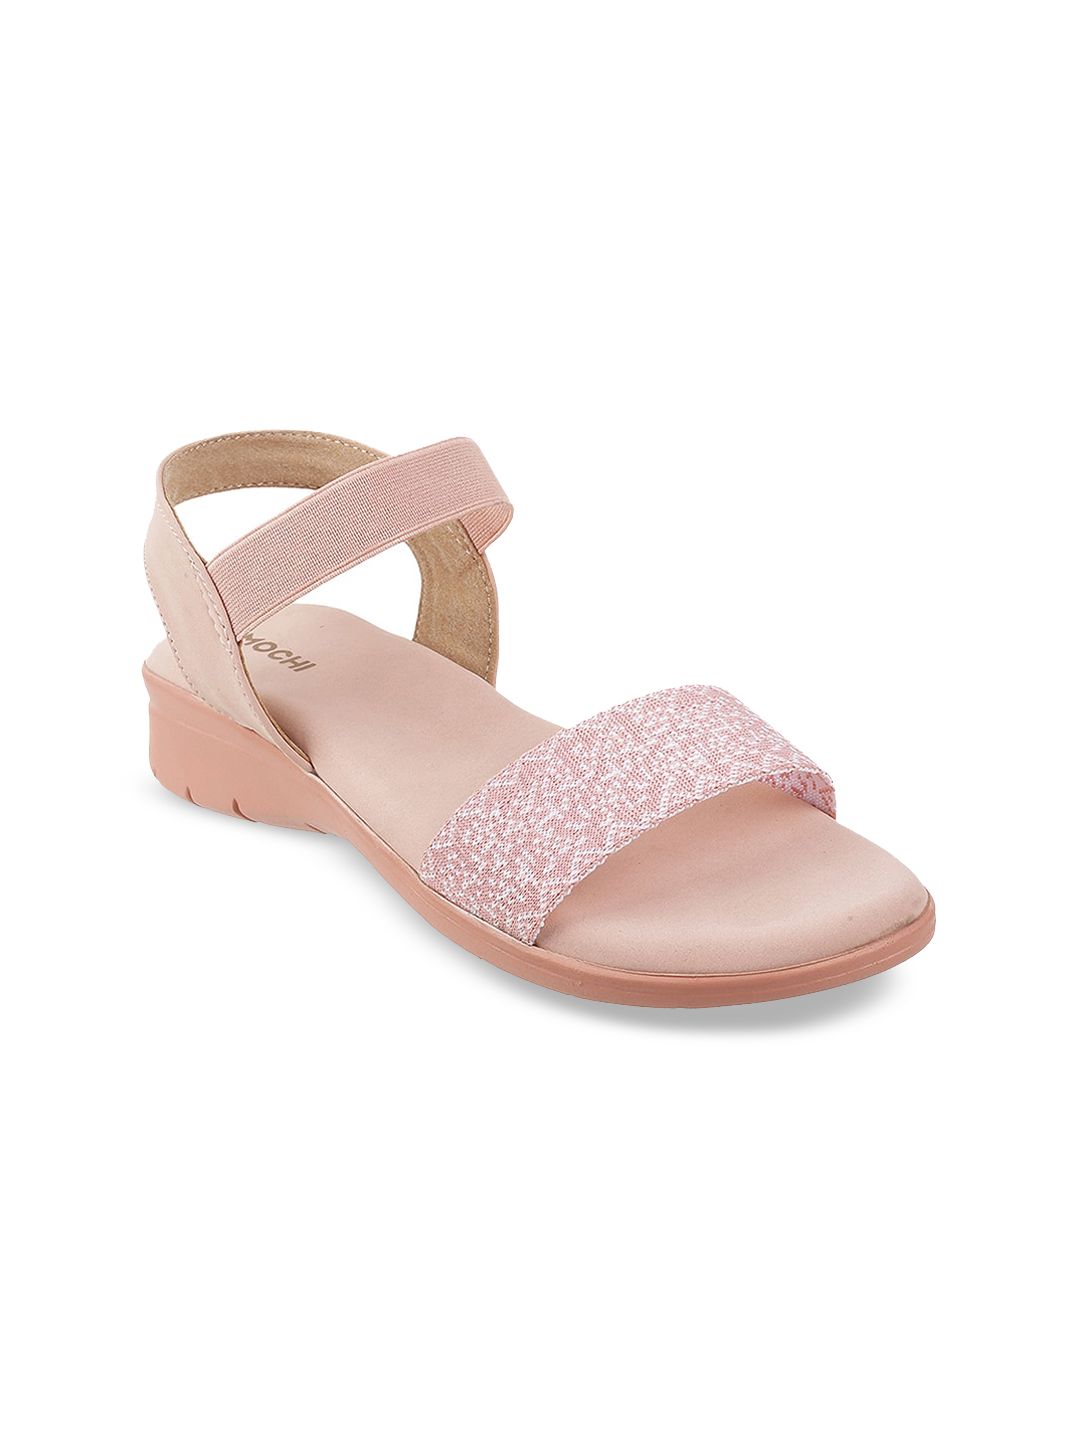 Mochi Women Pink Open Toe Flats Price in India